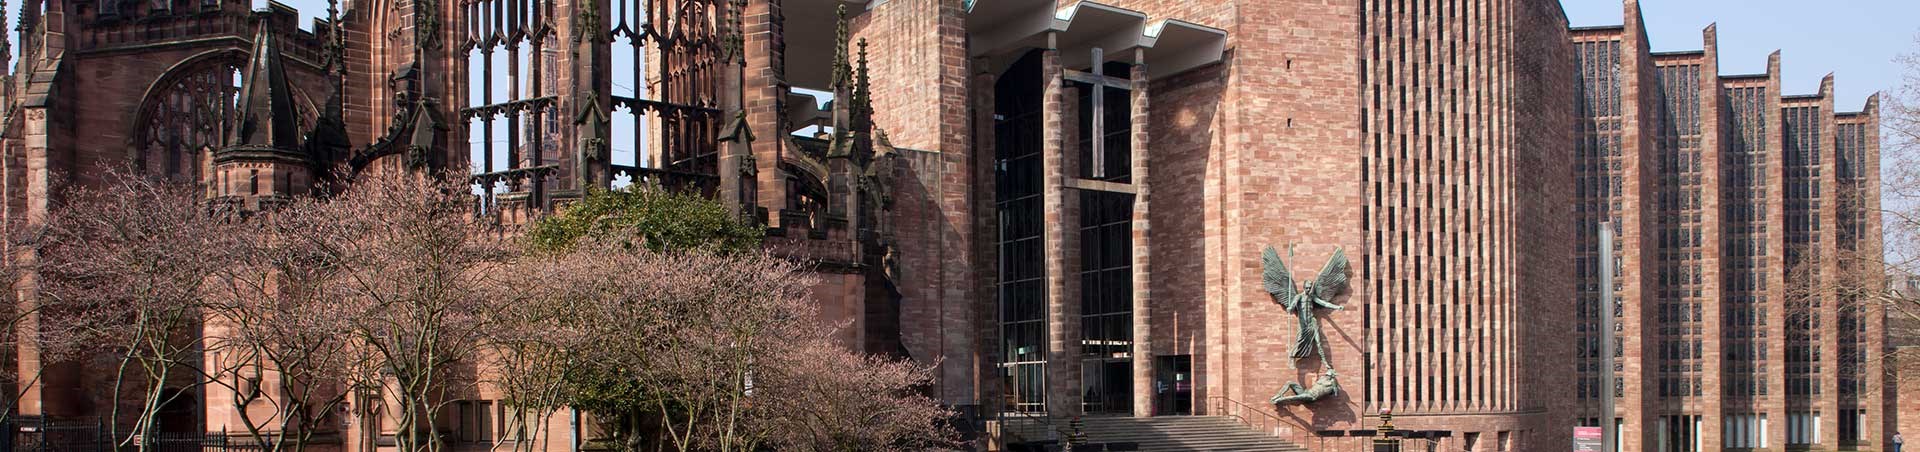 Coventry cathedral ruins